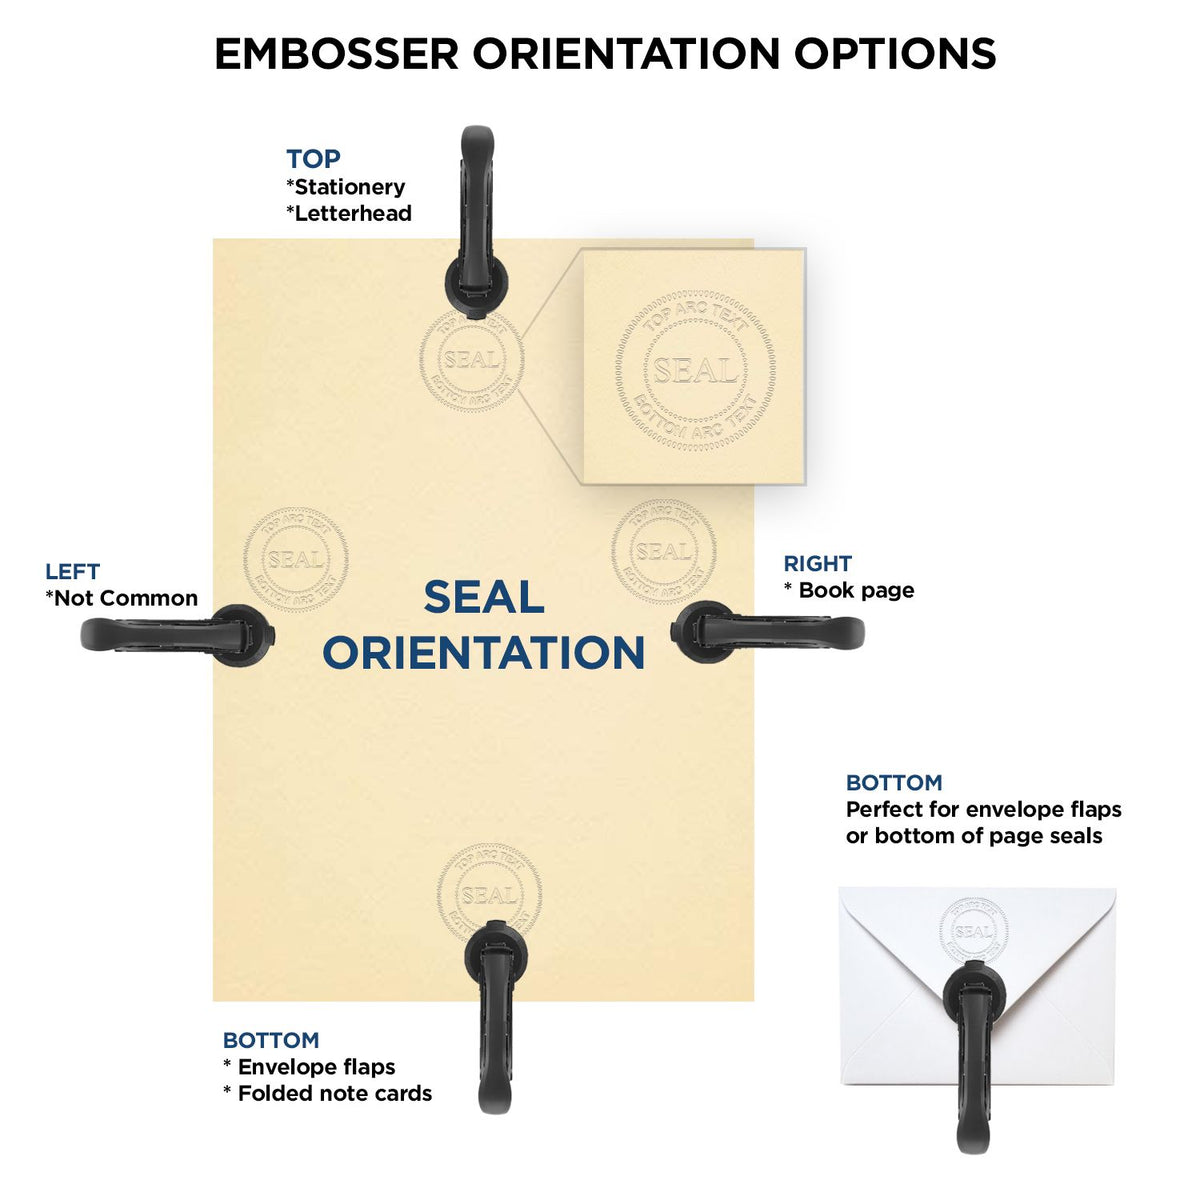 An infographic for the State of Connecticut Soft Land Surveyor Embossing Seal showing embosser orientation, this is showing examples of a top, bottom, right and left insert.